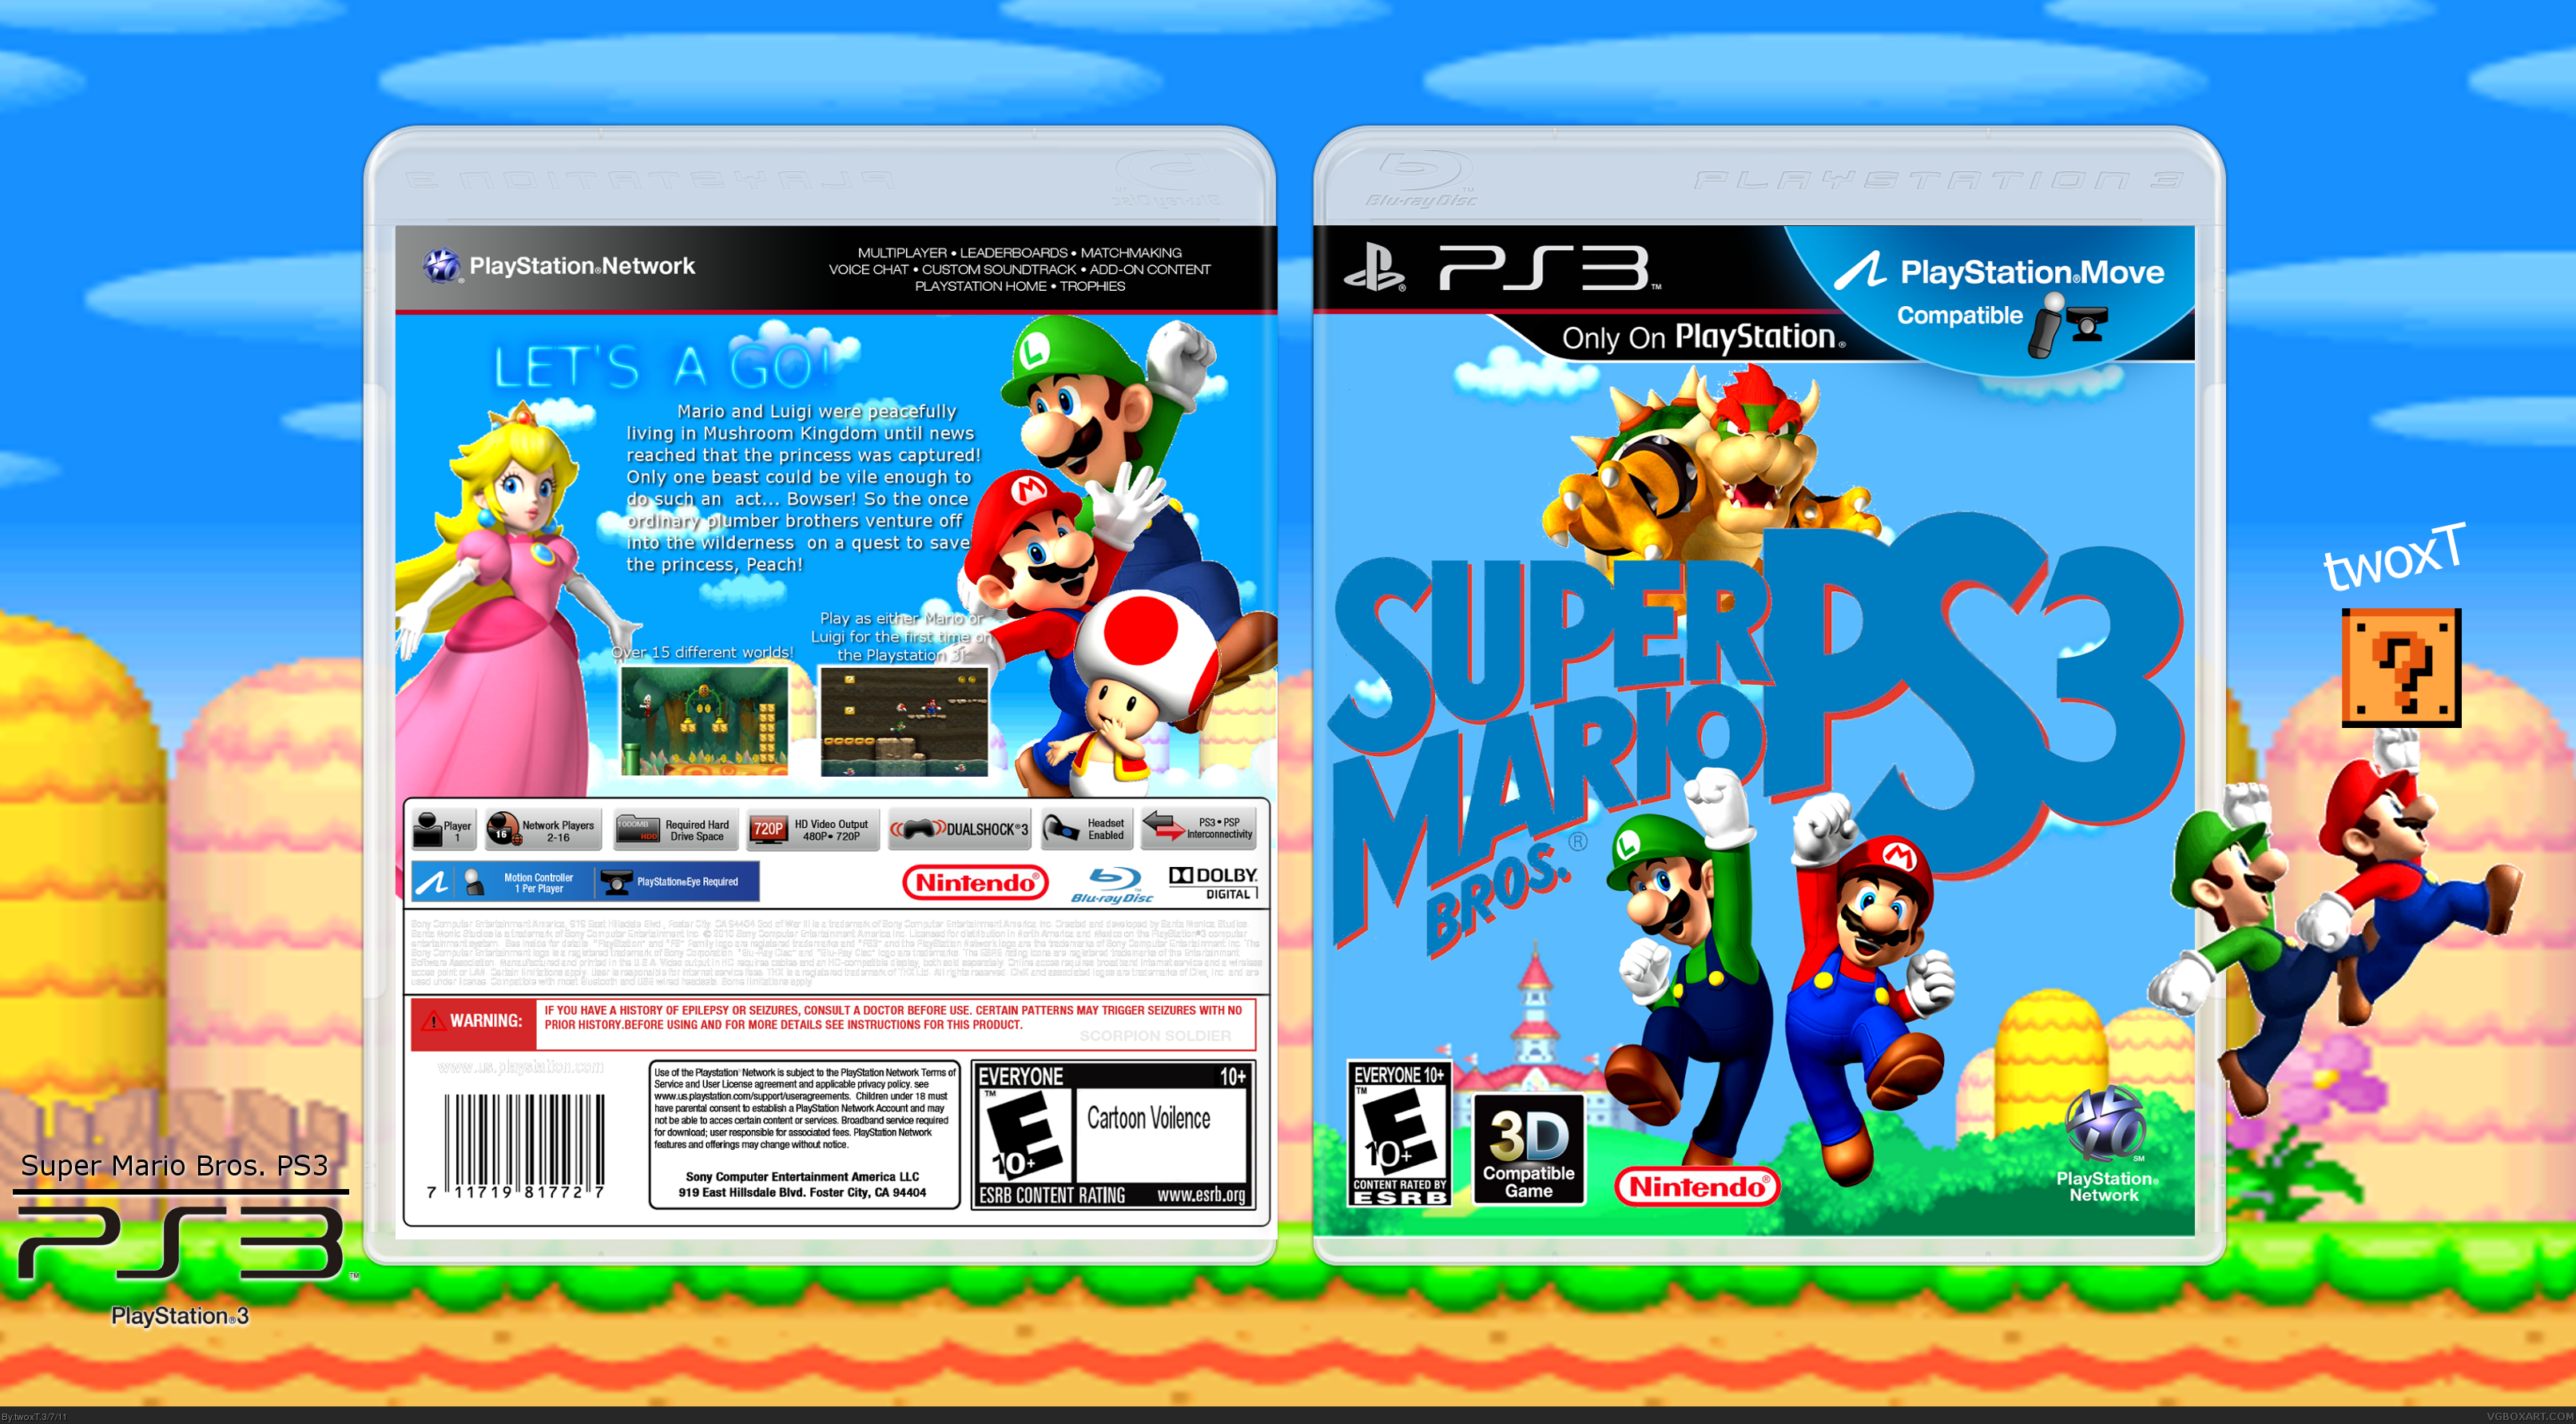 Super Mario Bros Ps3 Off 72 Online Shopping Site For Fashion Lifestyle